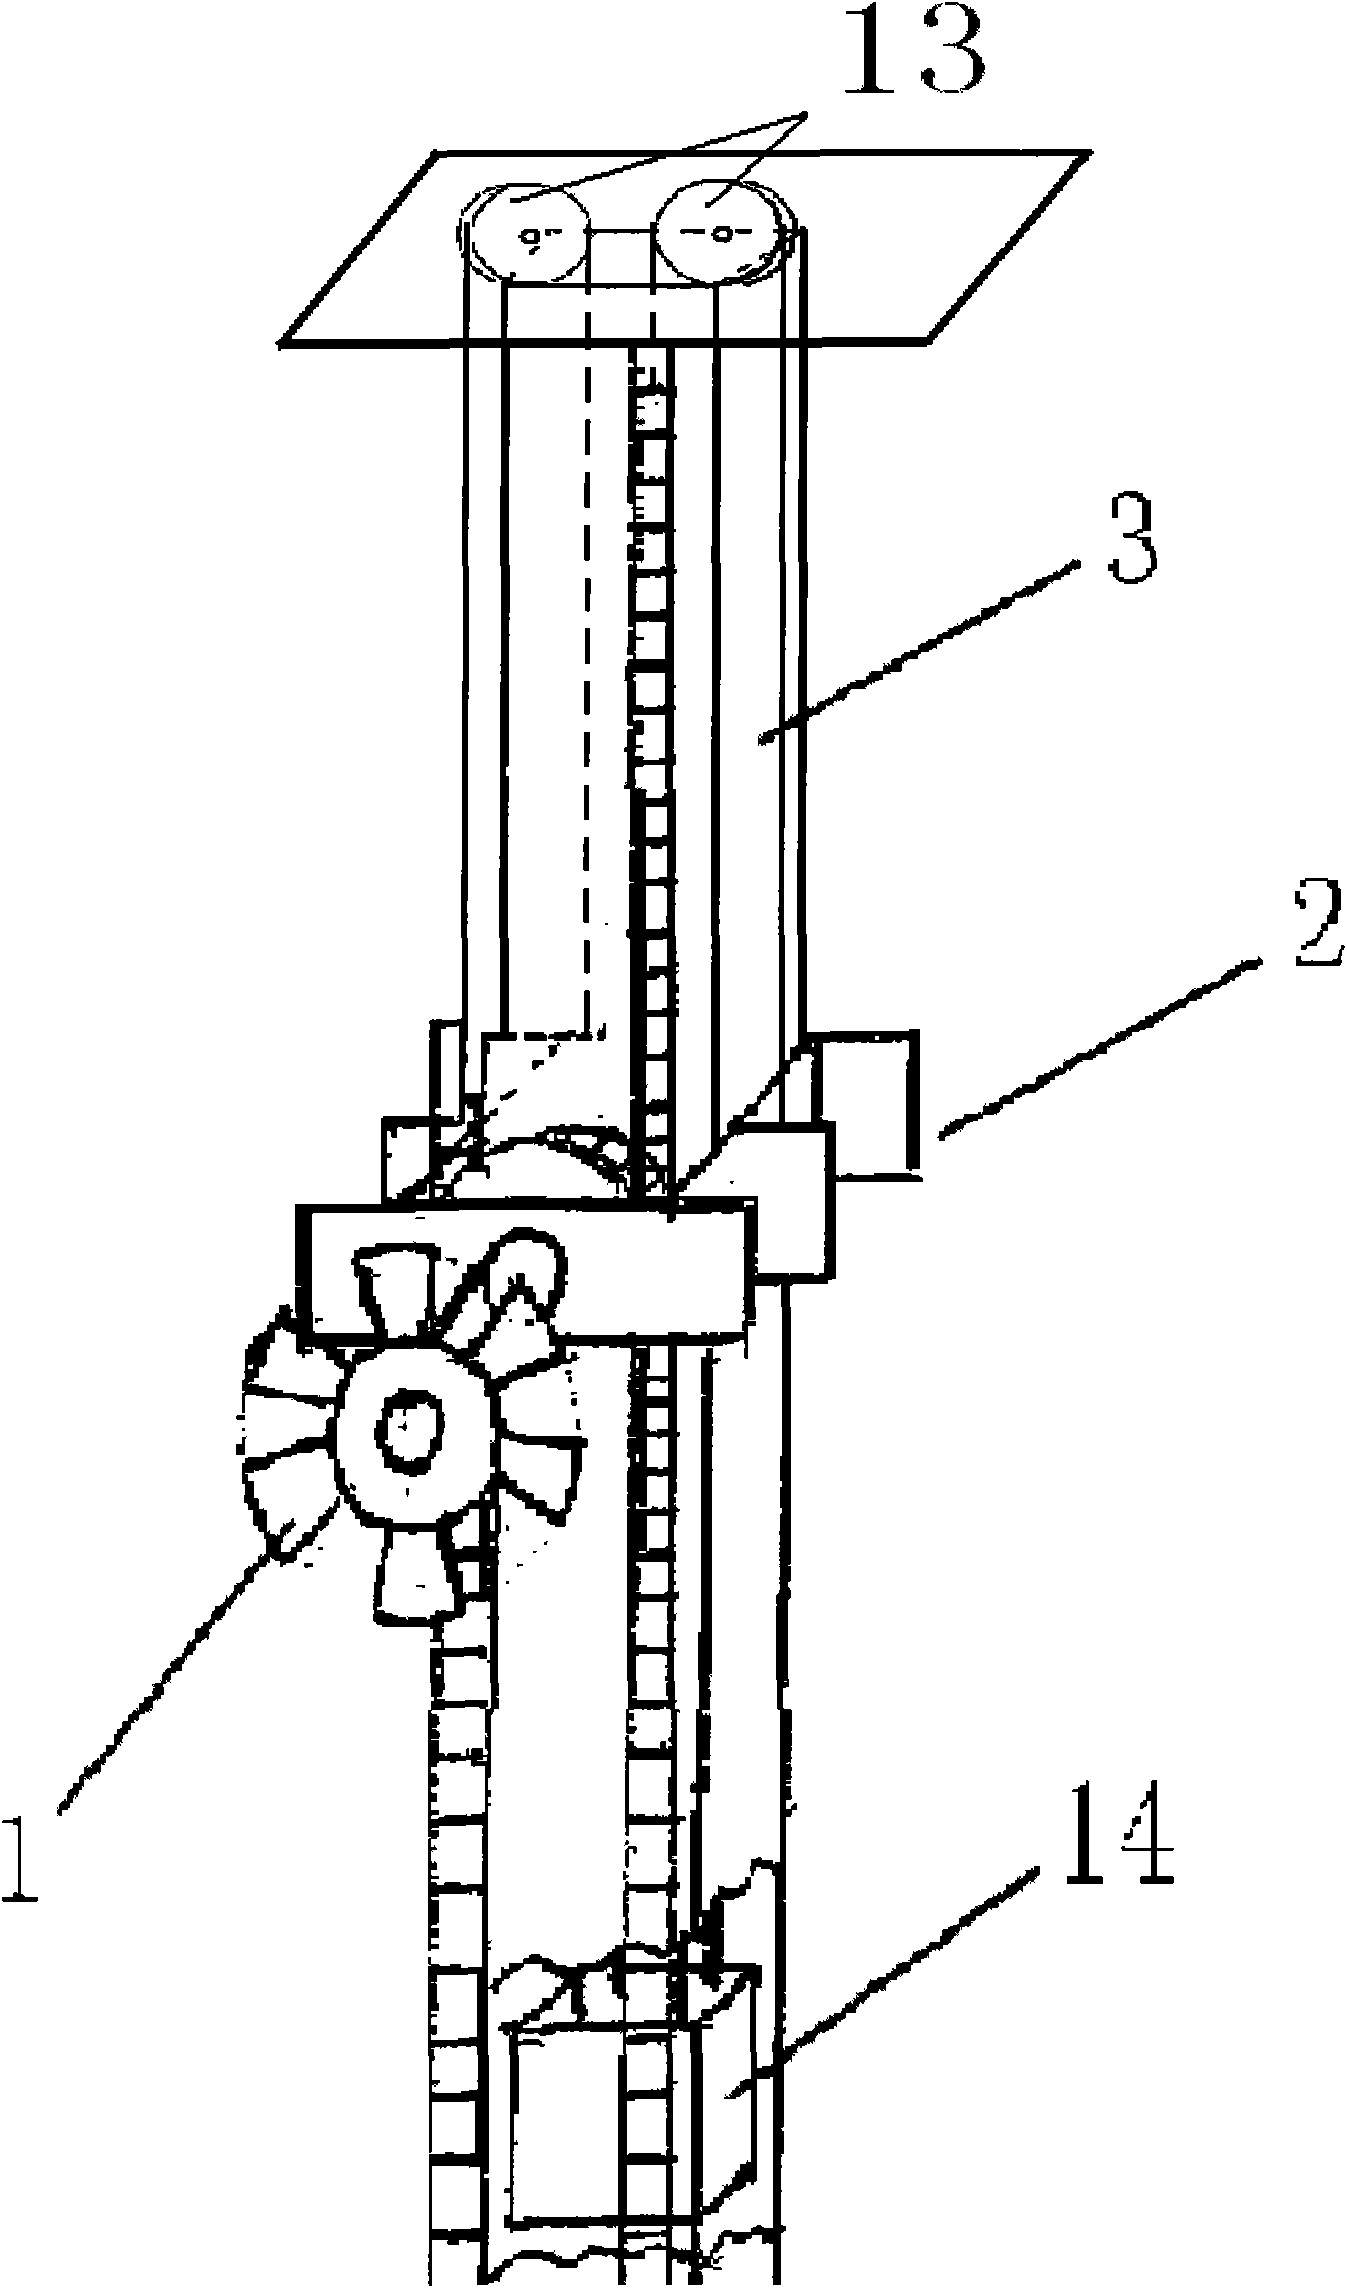 Slide carriage mechanism of window cleaning device